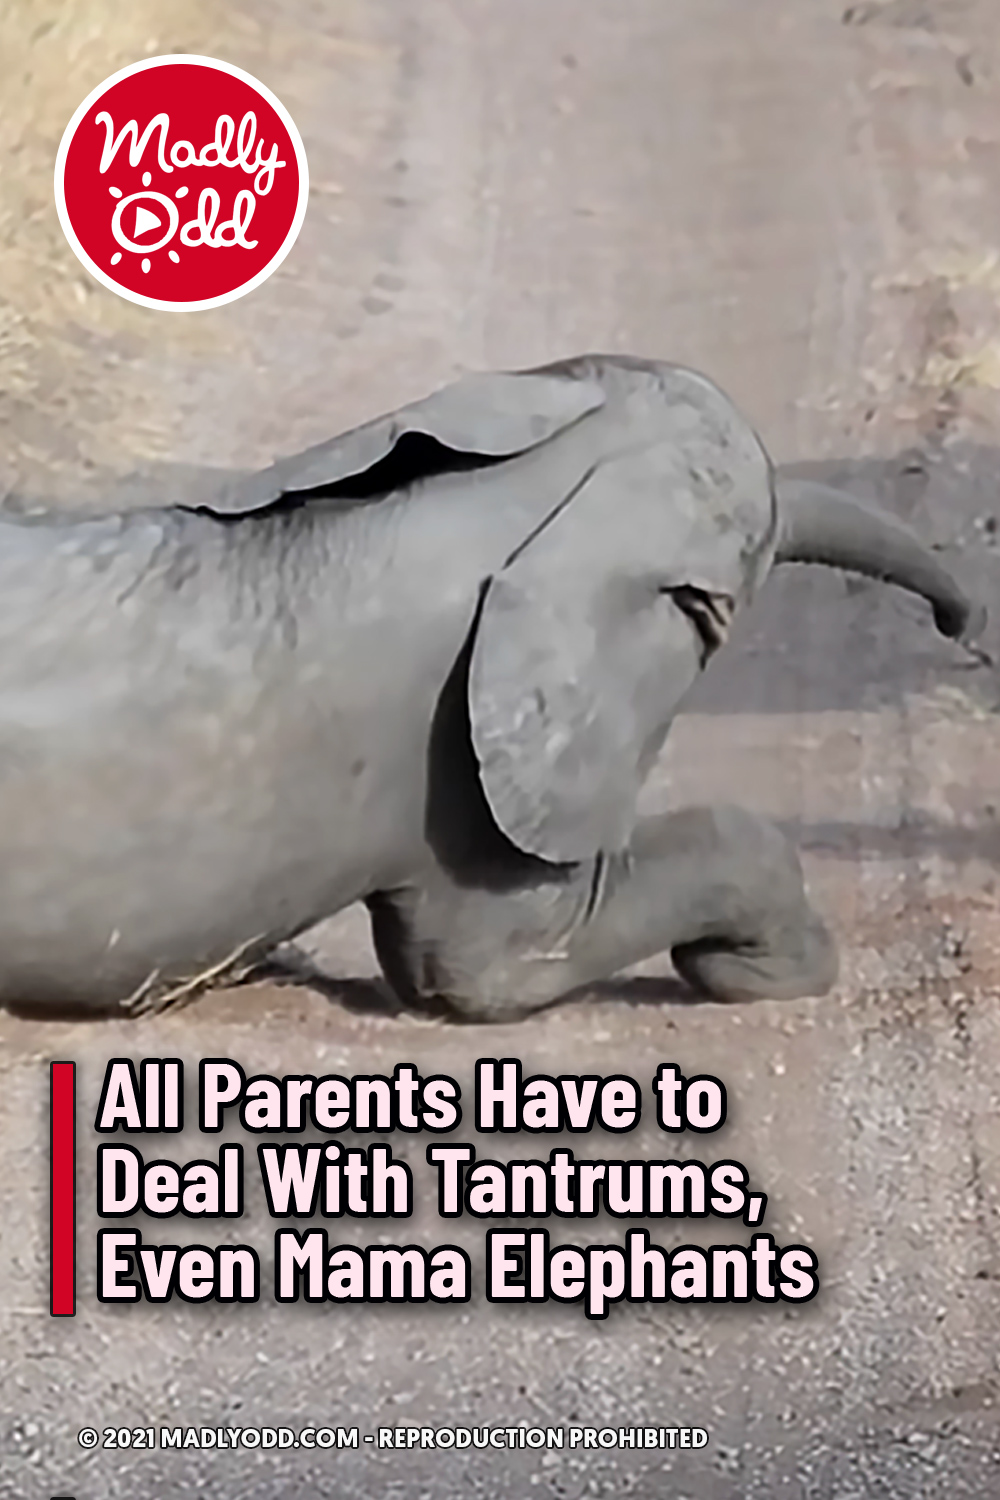 All Parents Have to Deal With Tantrums, Even Mama Elephants